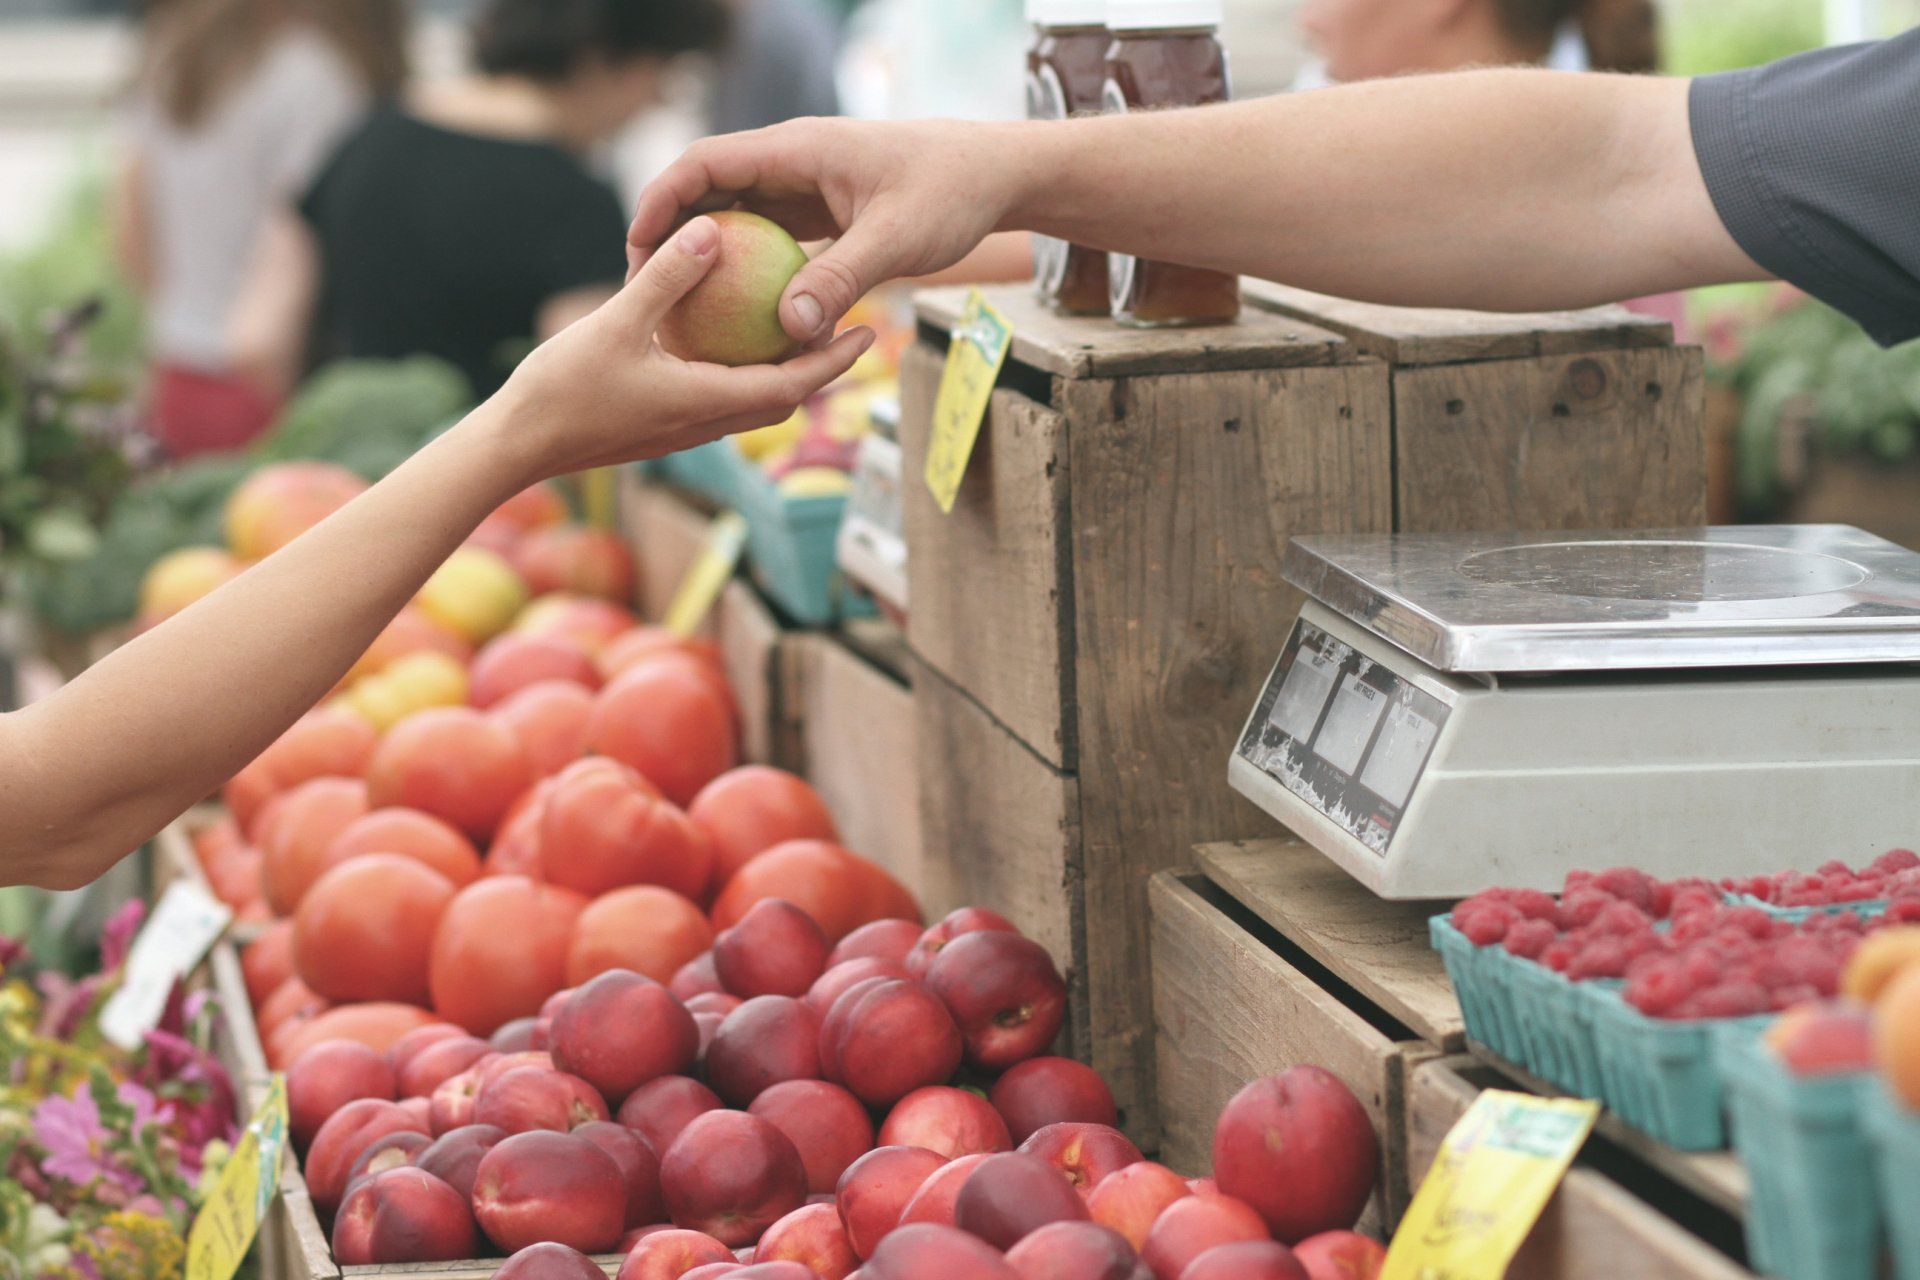 A person is buying apples at a farmers market.